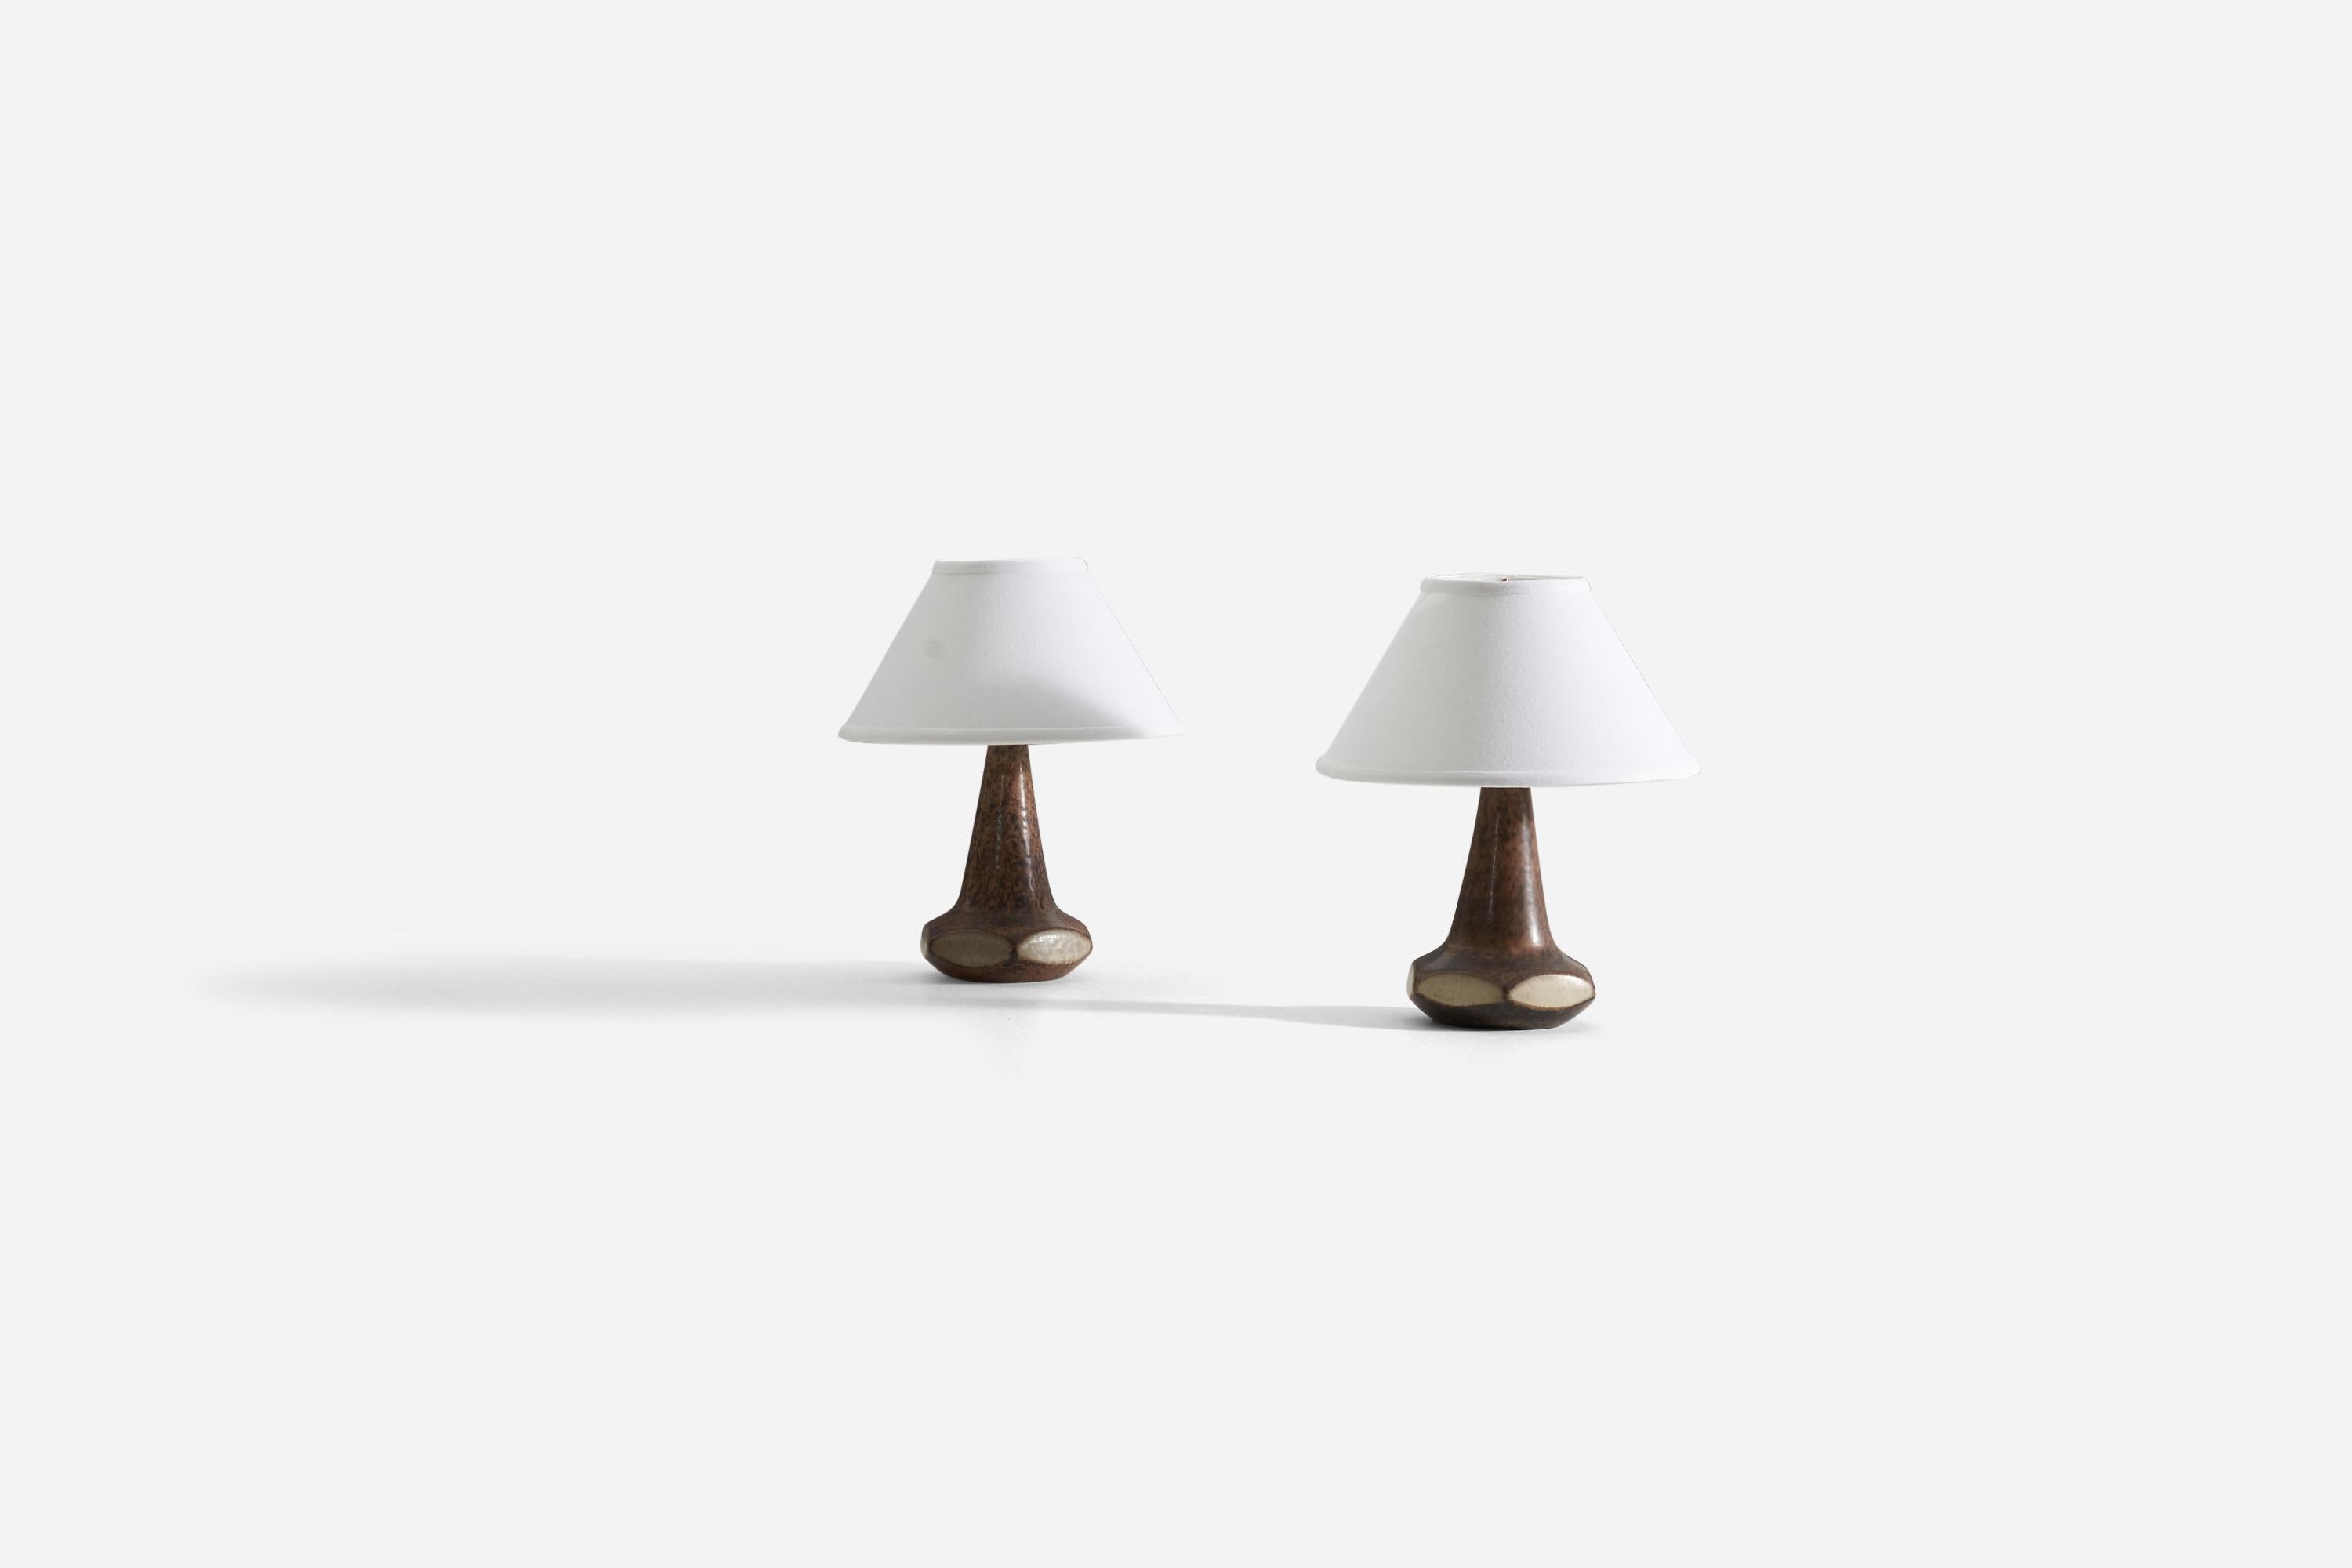 A pair of gray, brown, and black-glazed stoneware table lamps produced by Michael Andersen Keramik. Underside marked and labeled

Sold without lampshade. Dimensions in listing exclude shade.
For reference:
Dimensions of lamp with shade H 12.1” /